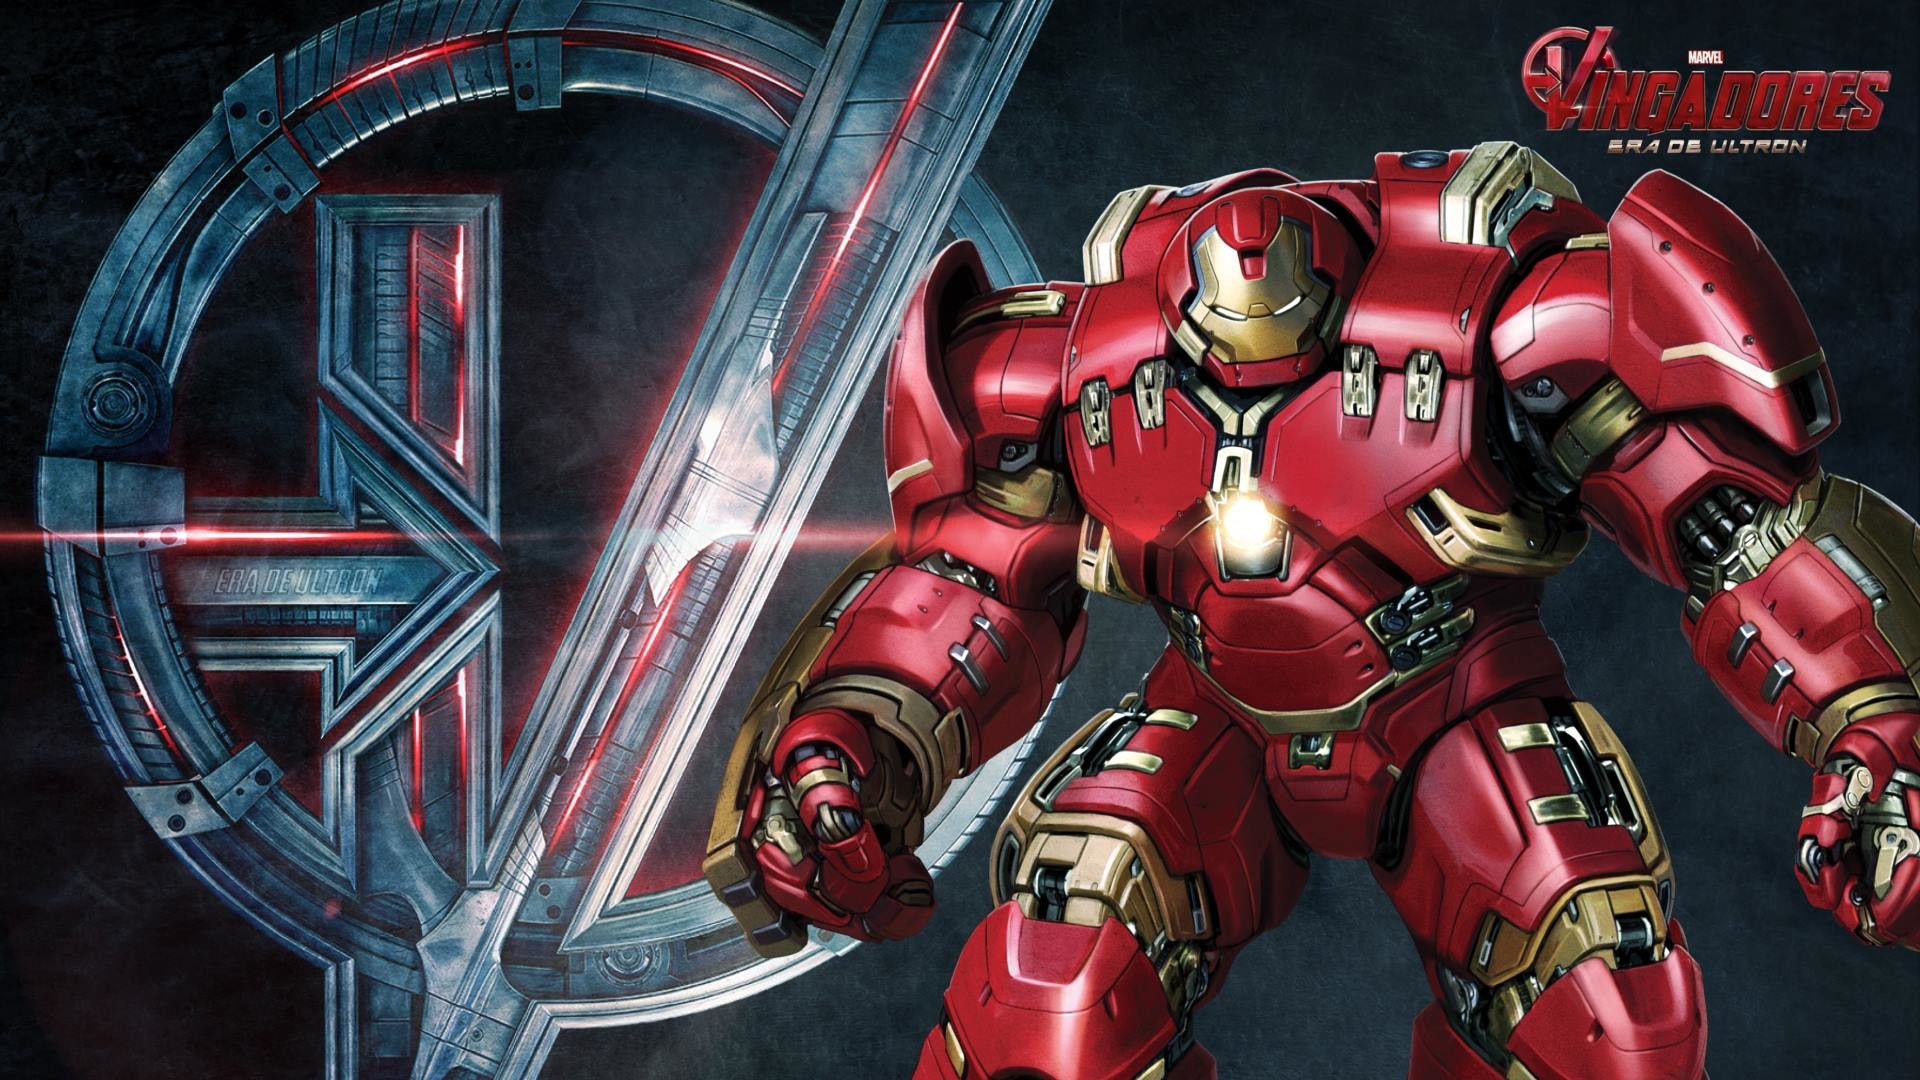 1920x1080 Check Out These Awesome 'Avengers: Age of Ultron' Character Wallpaper